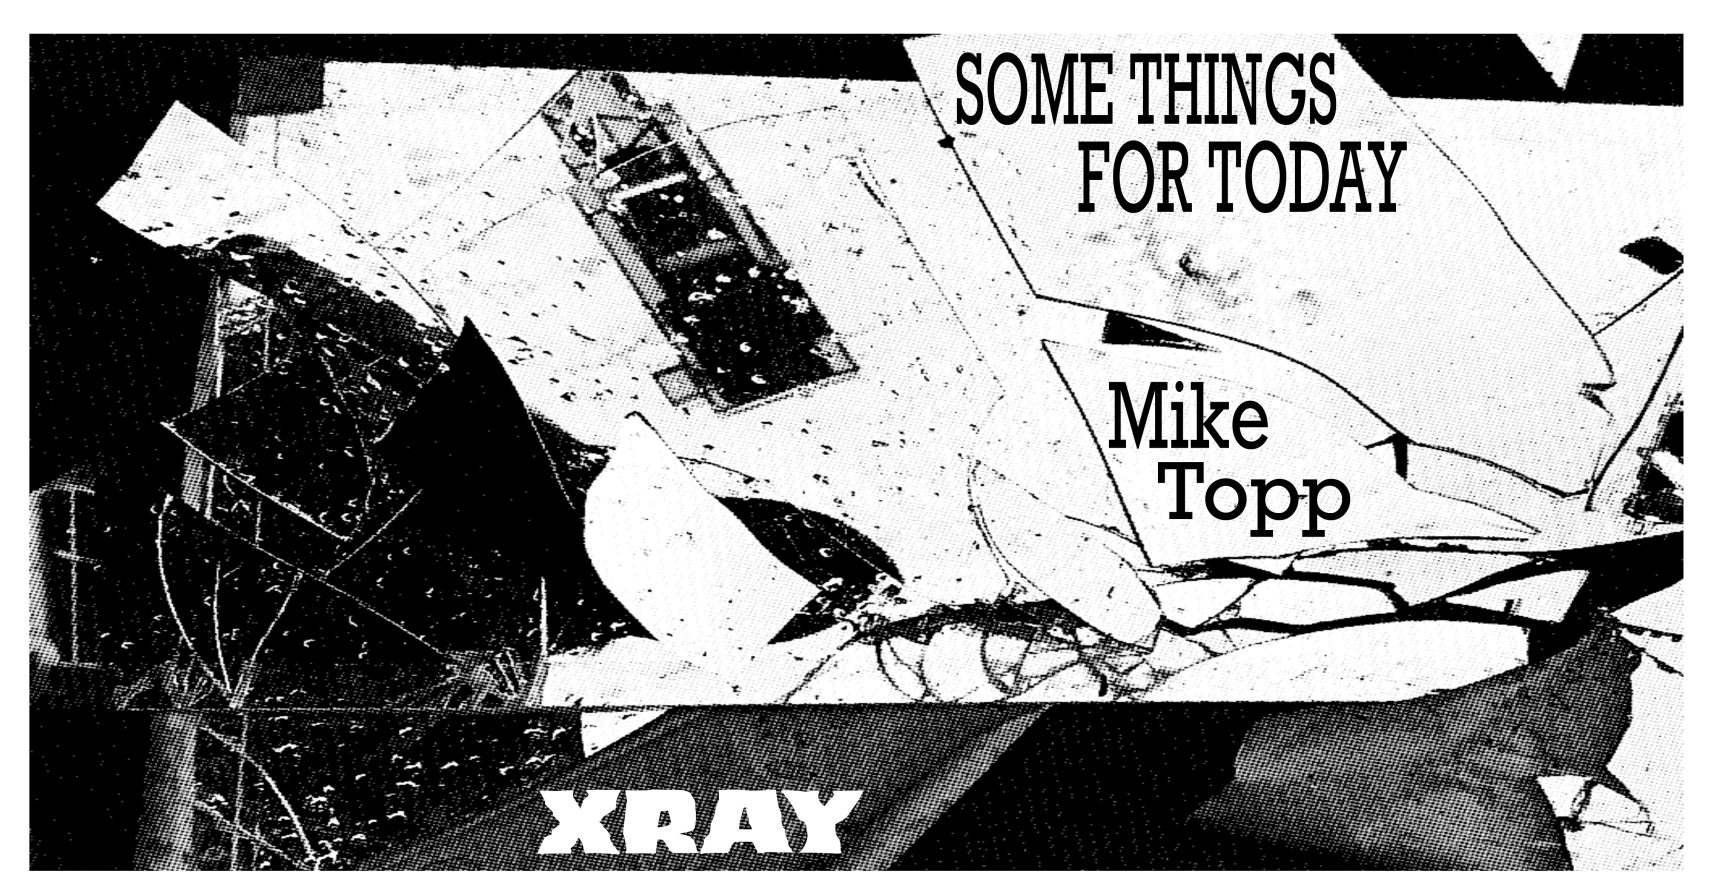 SOME THINGS FOR TODAY by Mike Topp